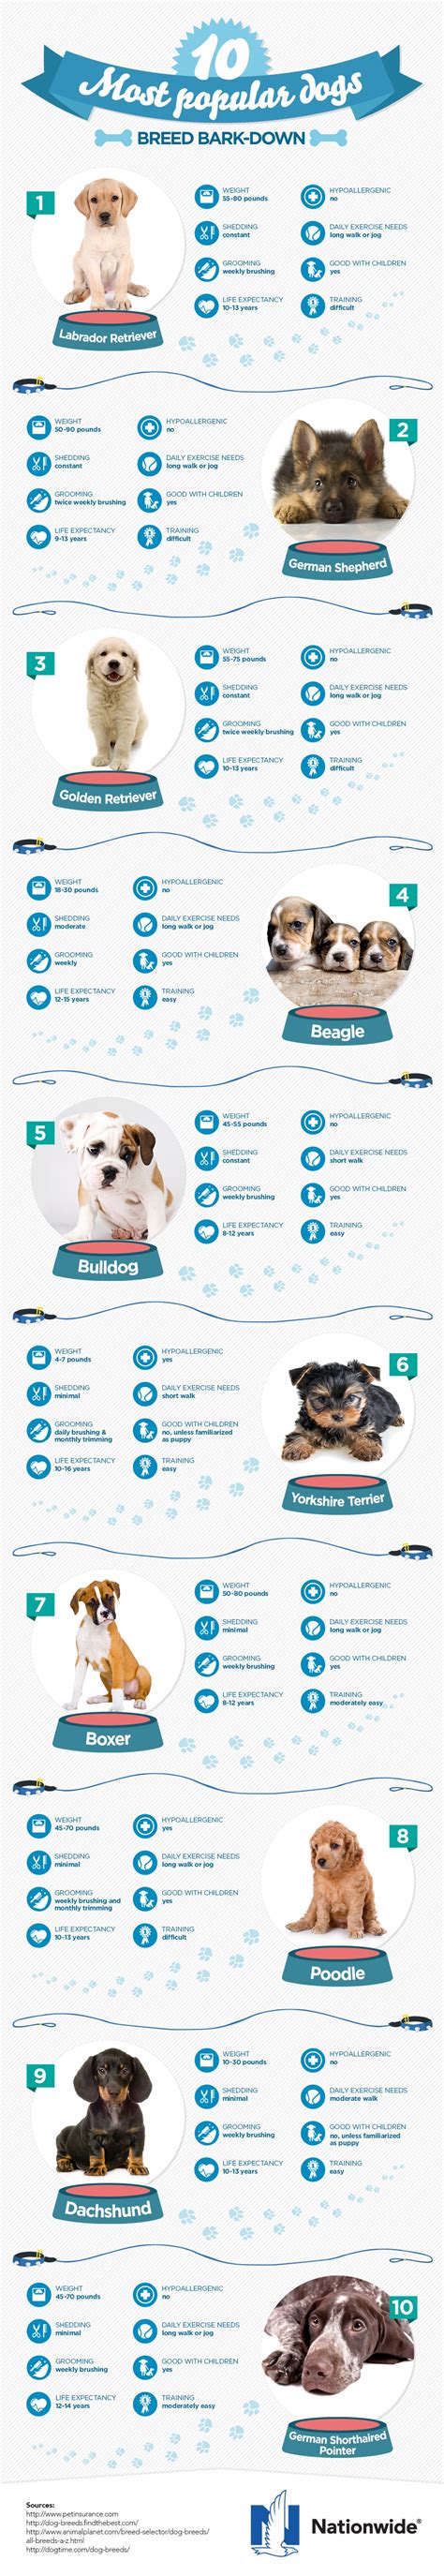 The 10 Most Popular Dogs